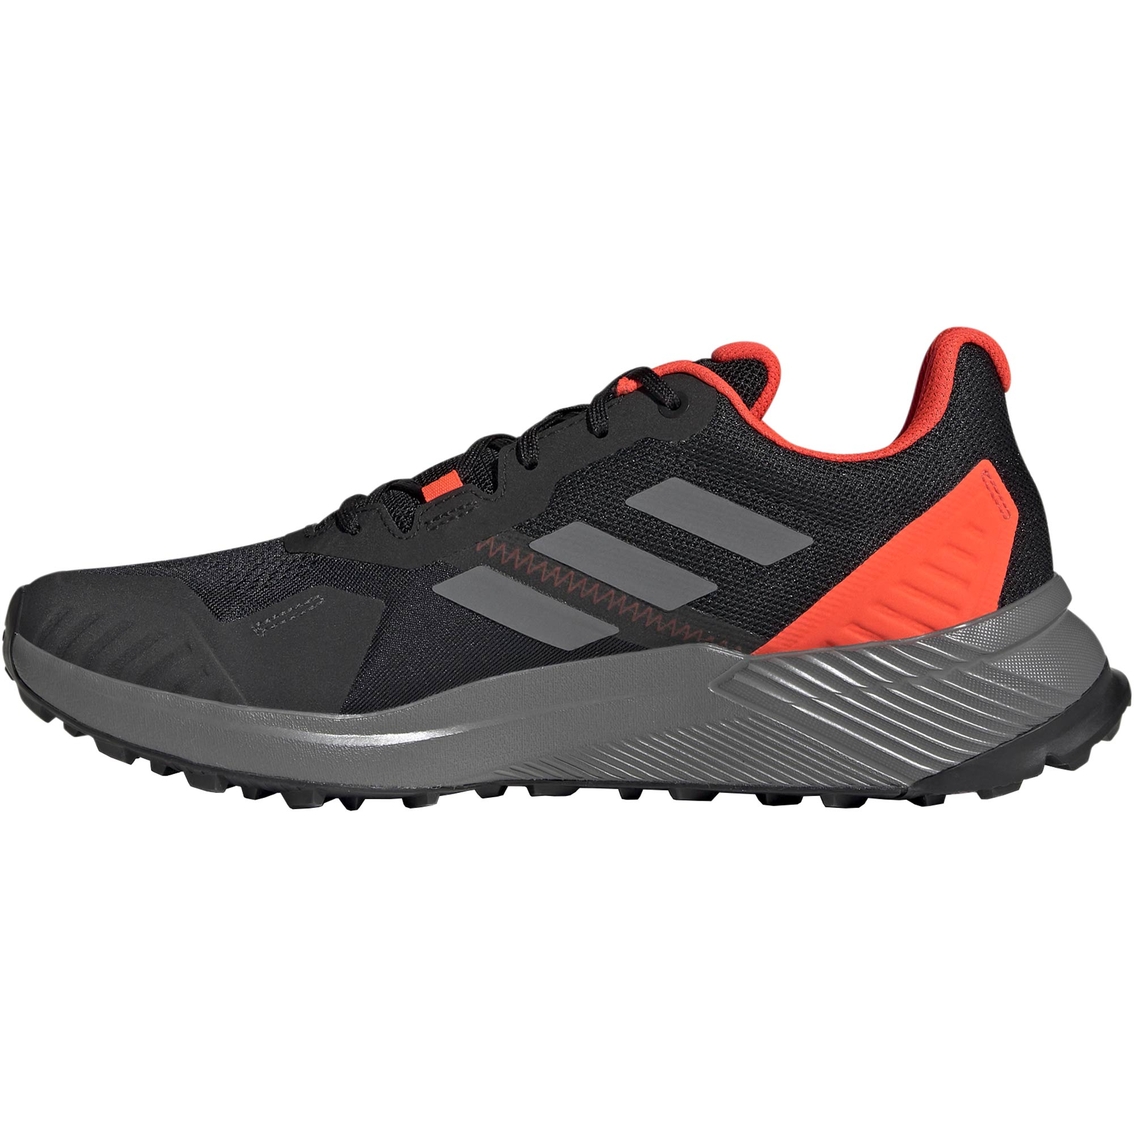 Adidas Terrex Soulstride Trail Running Shoes - Image 3 of 8